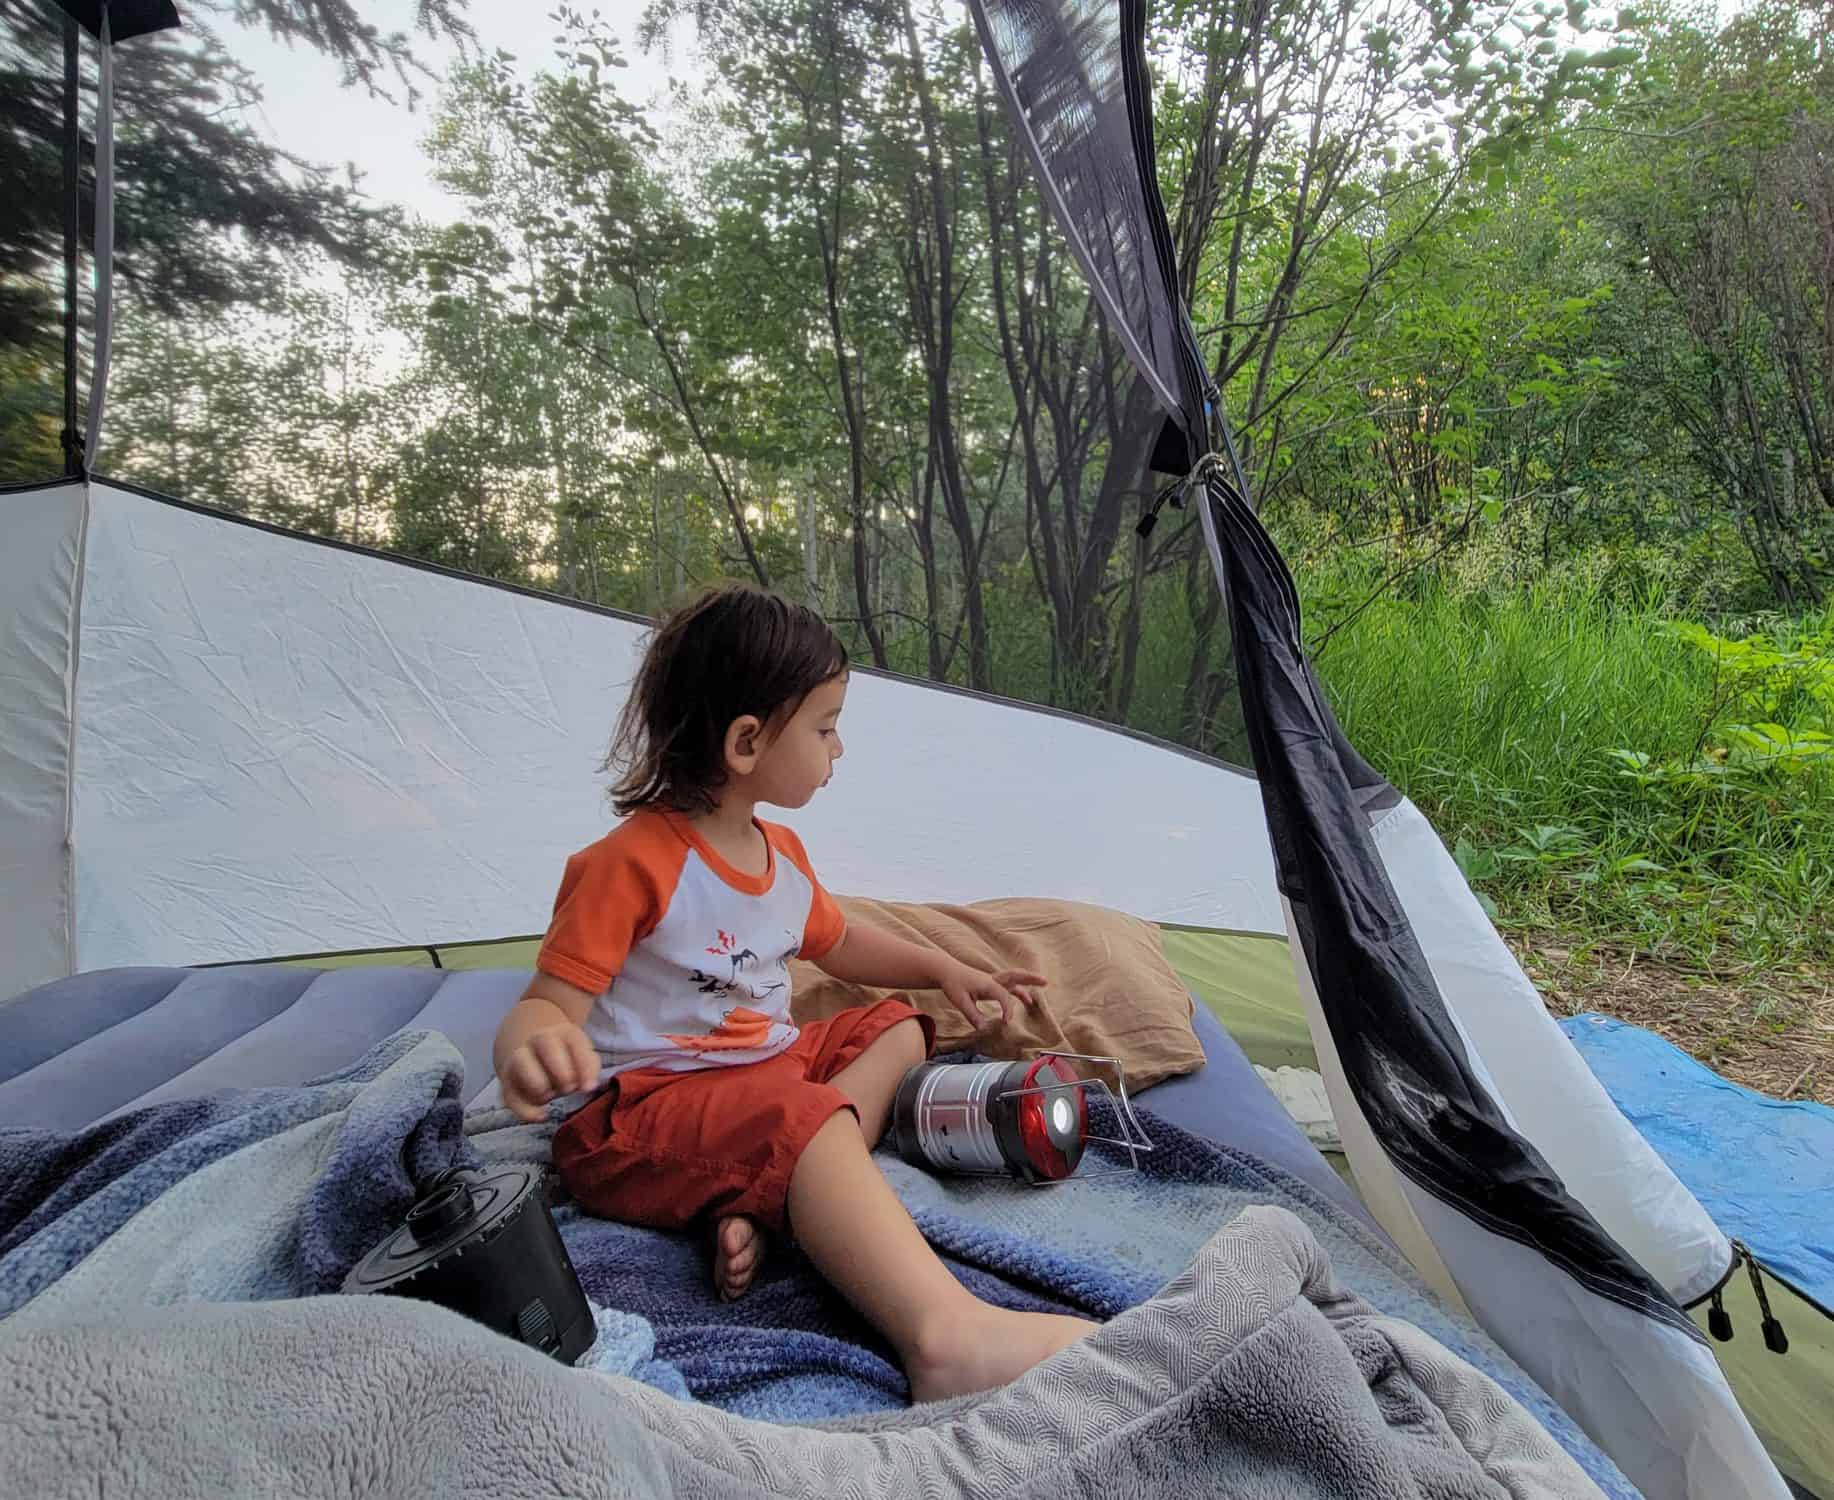 Family Camping Trip - 4 Reasons It's A Great Time To Bond